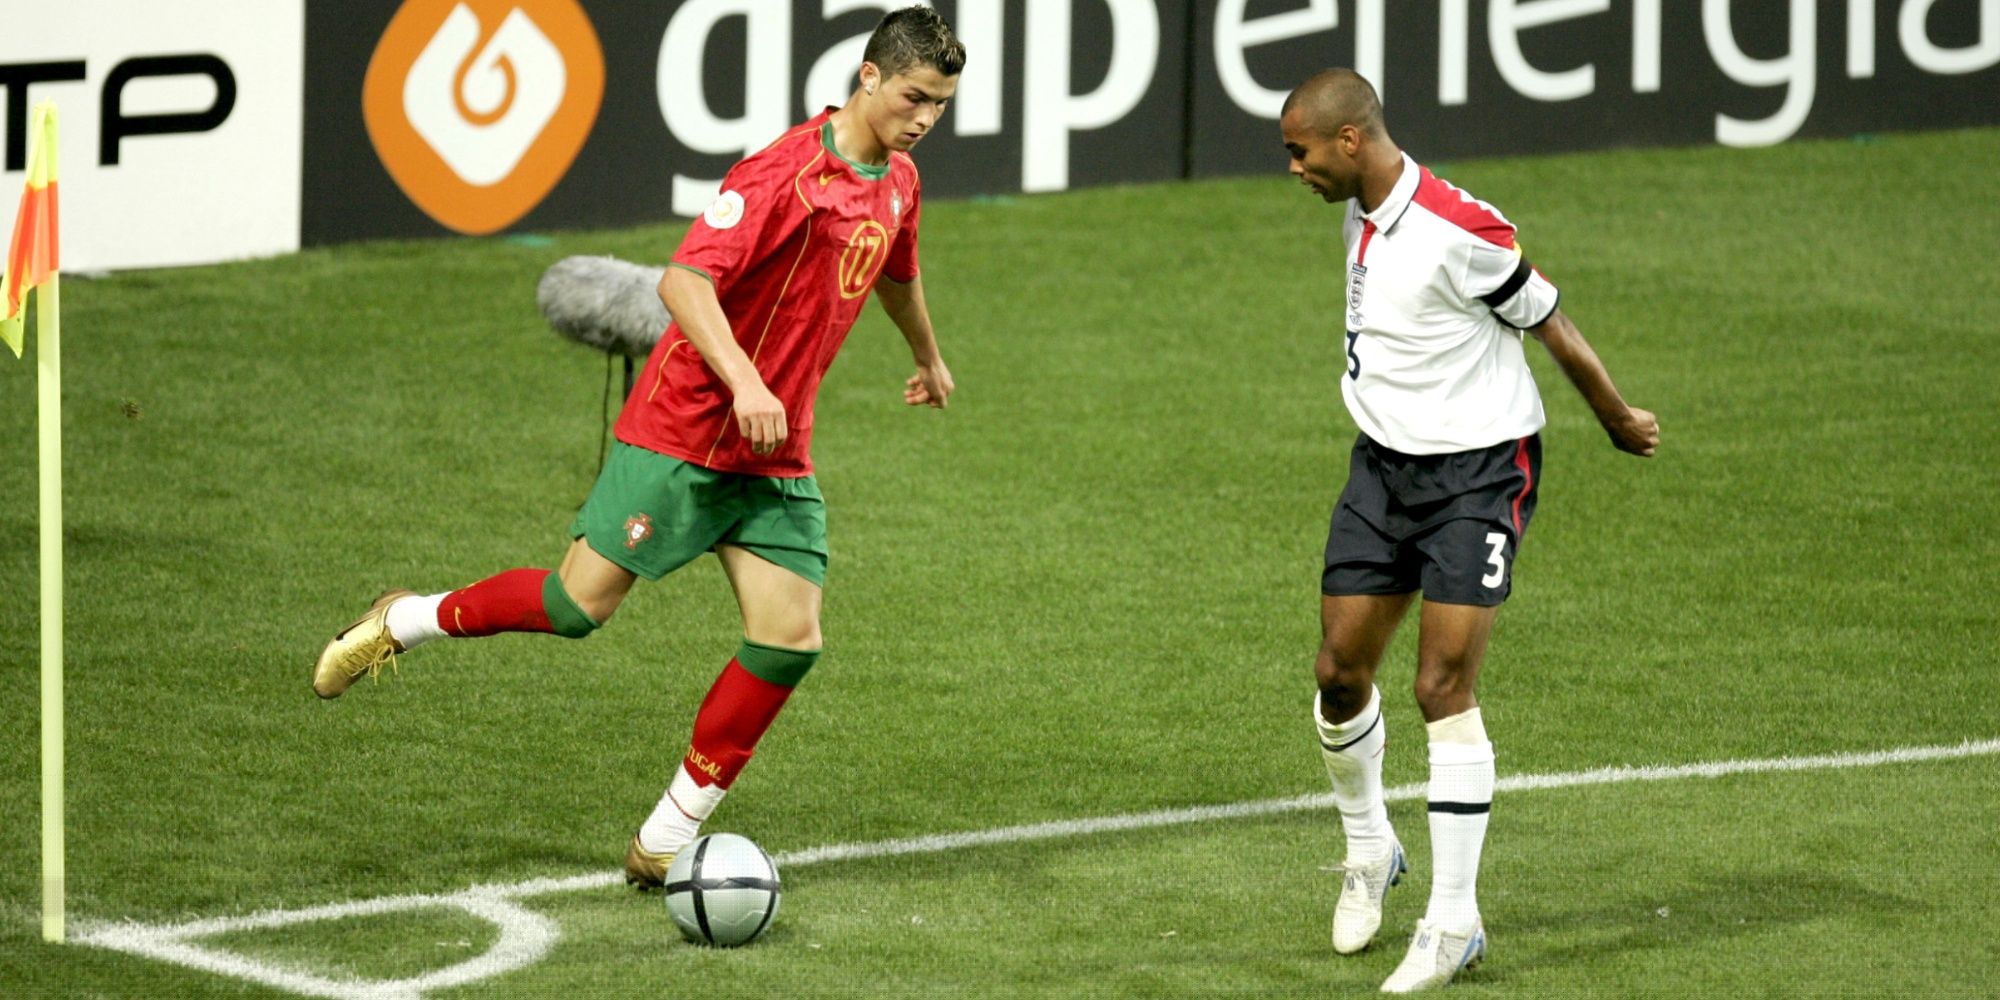 Portugal's Cristiano Ronaldo is chased by England's Ashley Cole